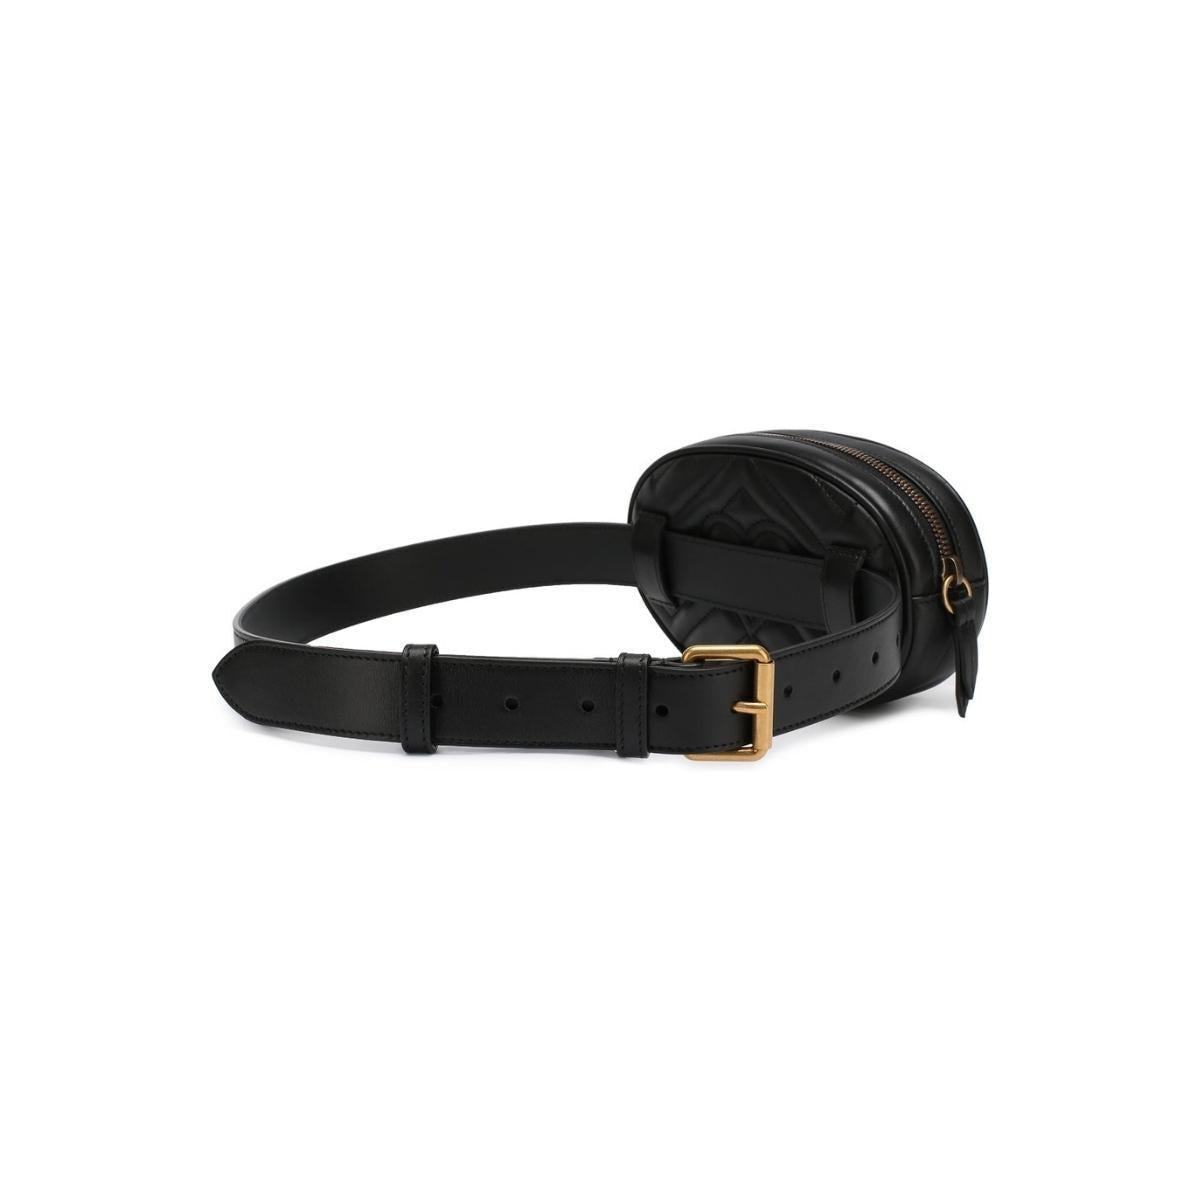 Gucci GG Marmont Matelassé Leather Belt Bag ($1,050) ❤ liked on